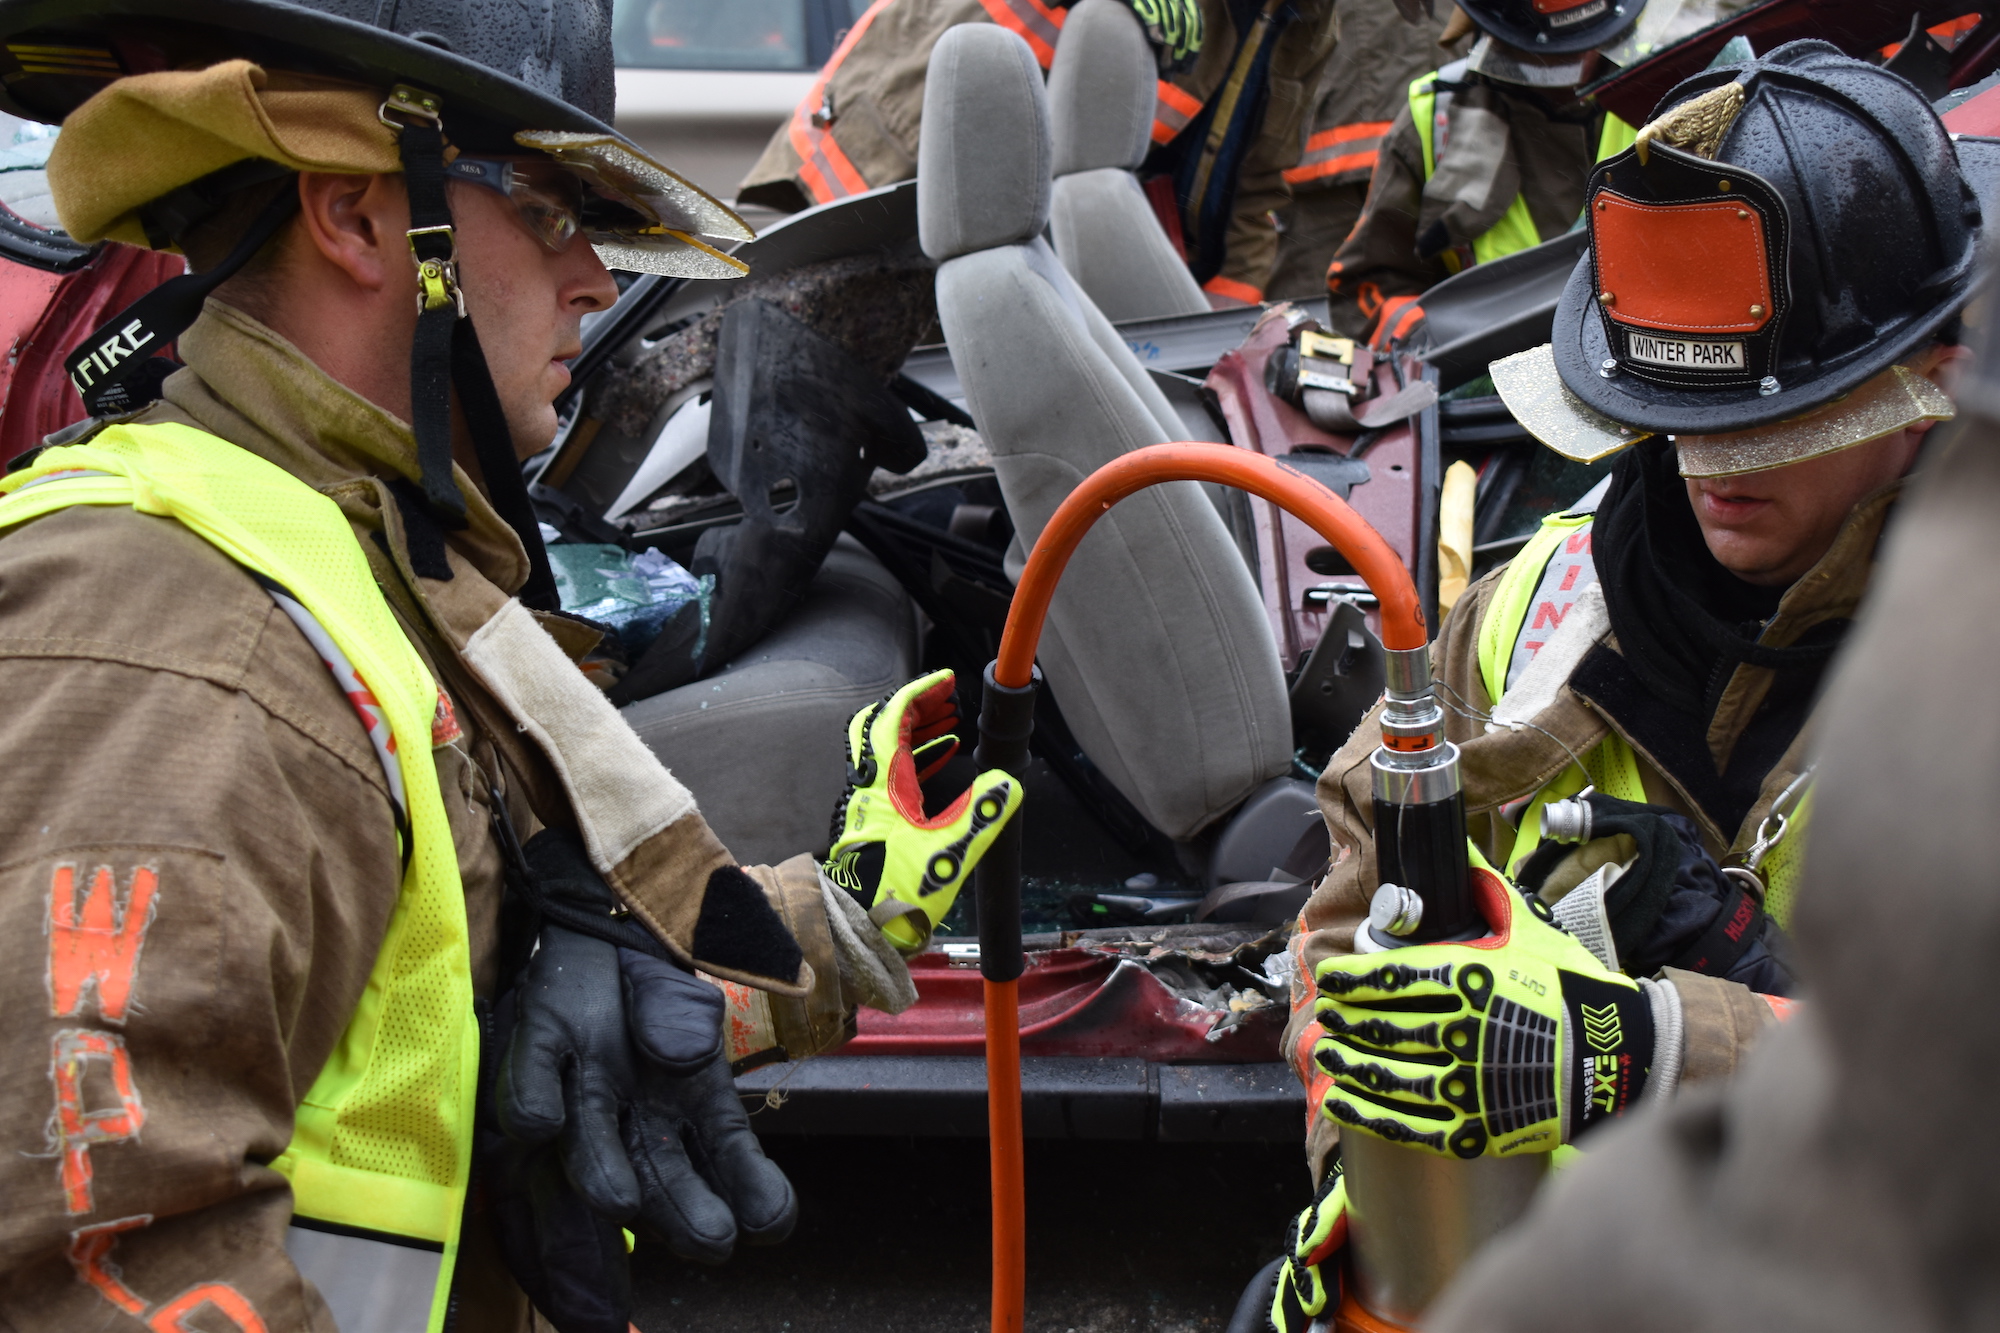 Two firefighters working with extrication tools during training in front of a cut up vehicle.